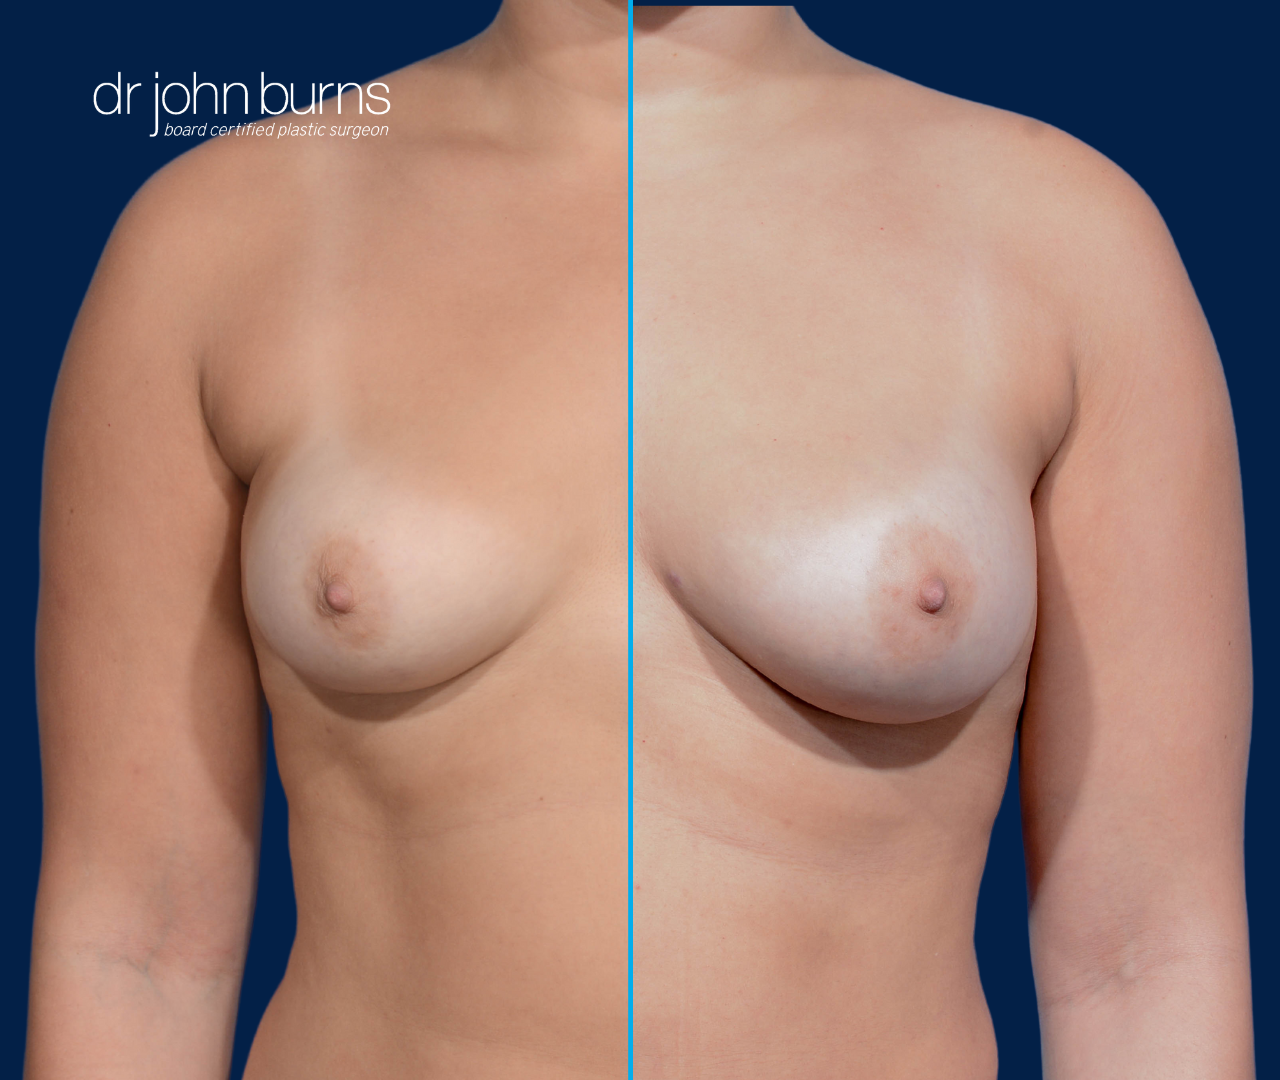 Split Screen Before and After Fat Transfer to Breasts Fat Transfer to Breasts, 500cc per breast, by Dr. John Burns